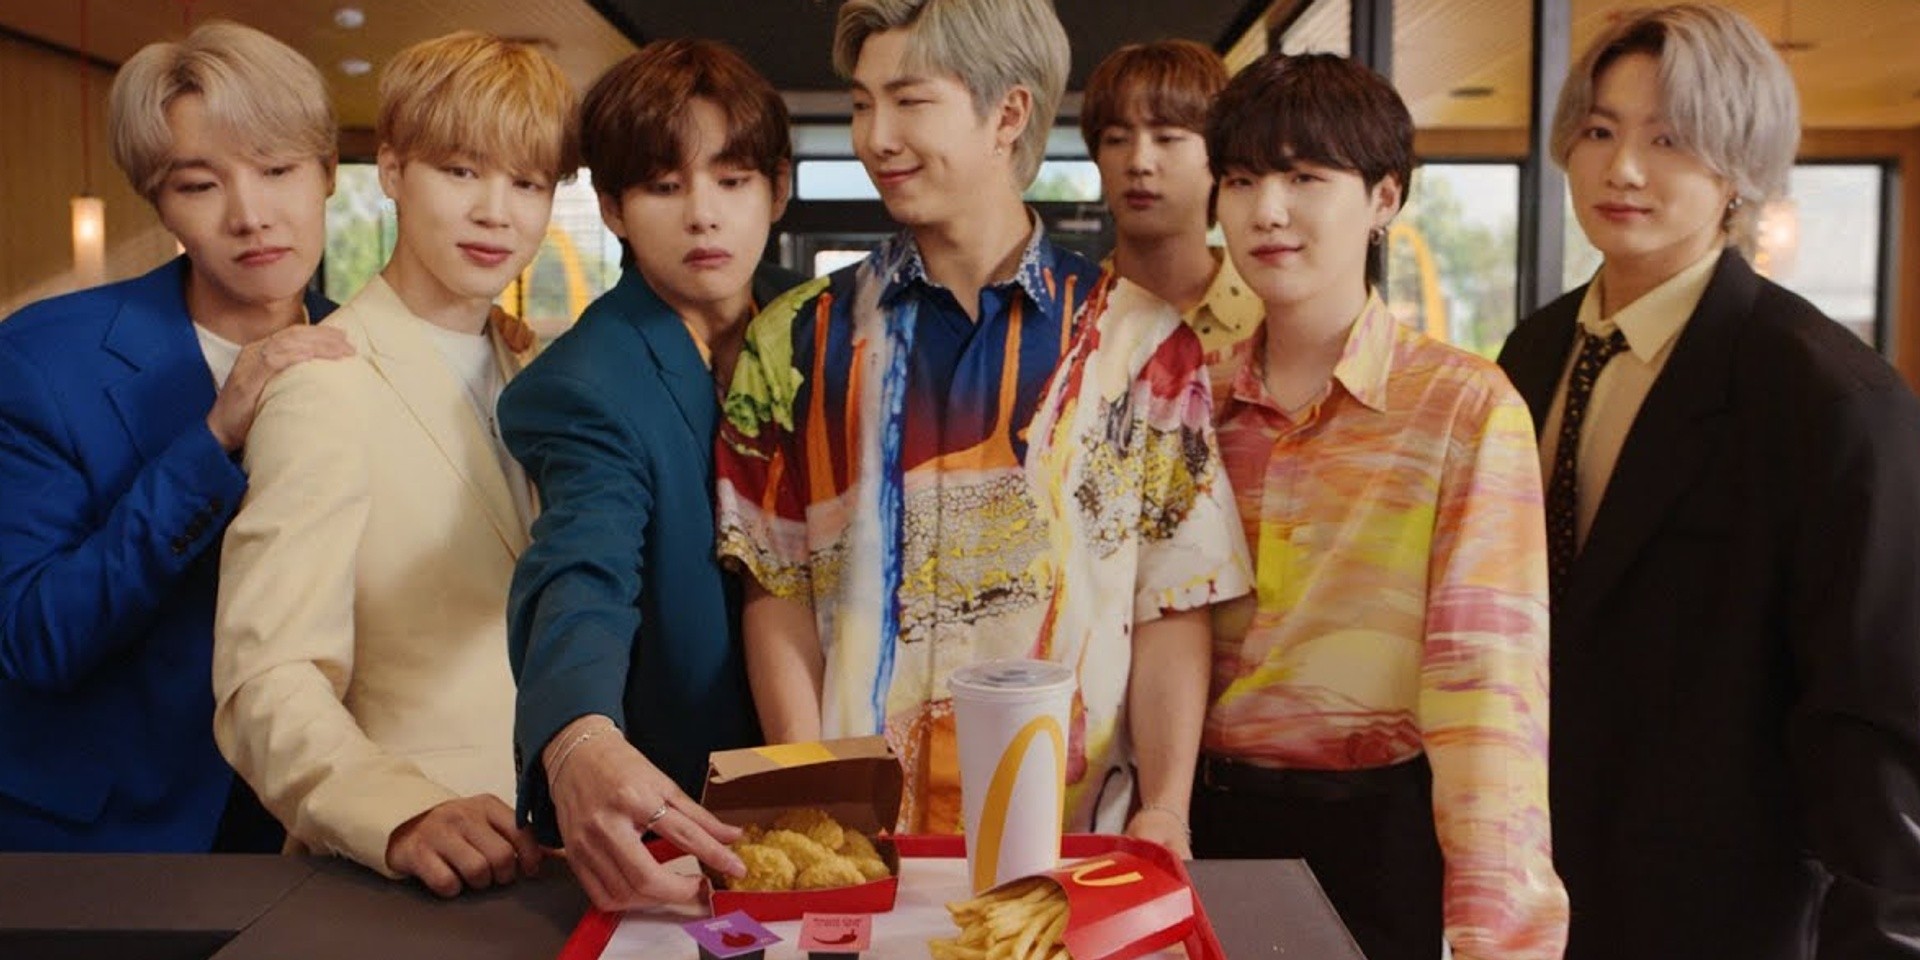 McDonald's Philippines sold close to 1 million BTS Meals in less than a week